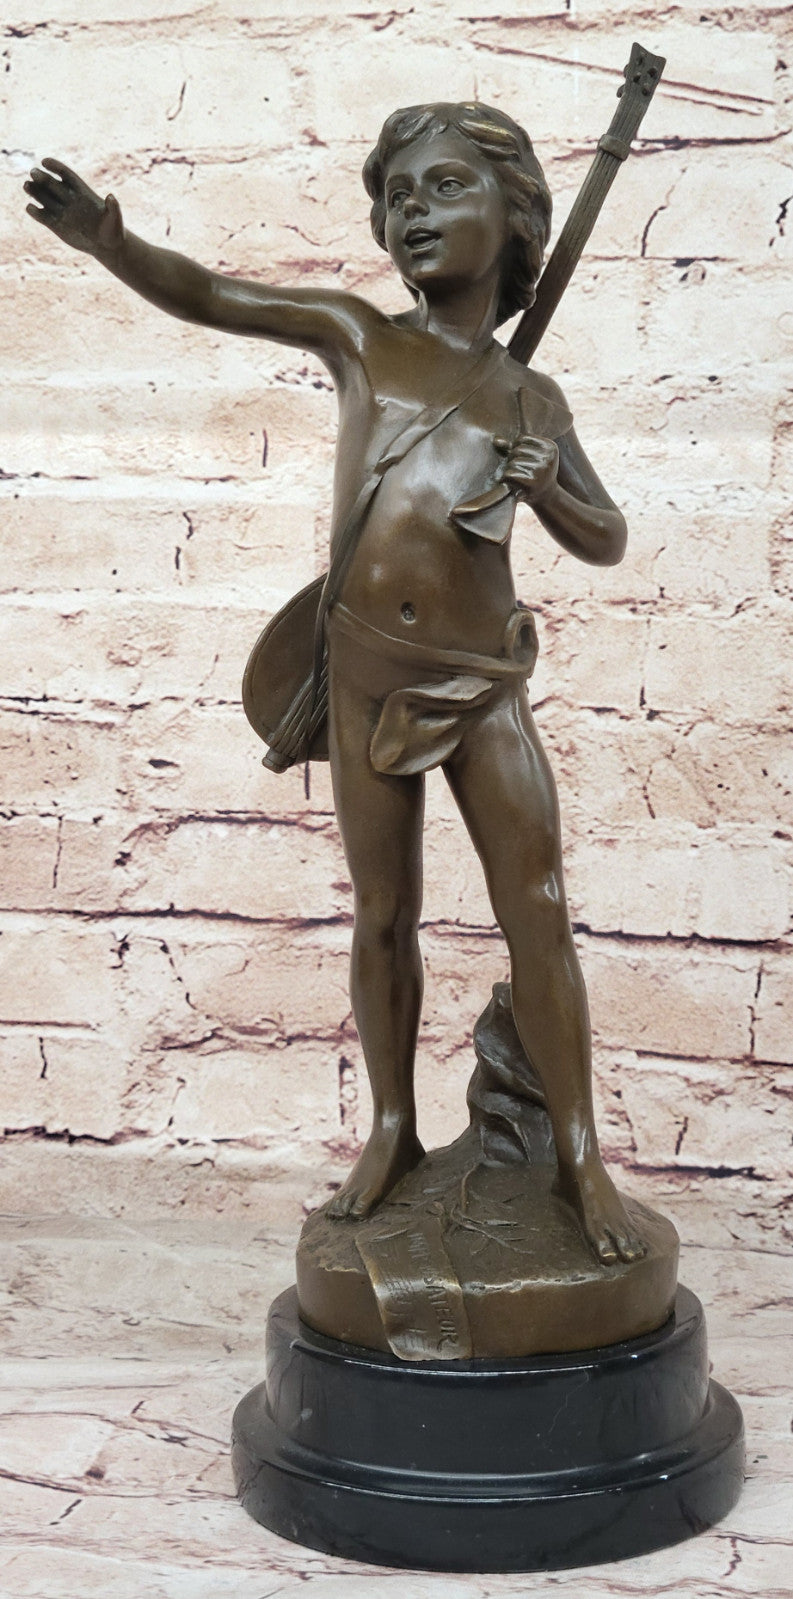 Handmade Bronze Statue by Moreau: Young Boy with Lute Banjo, Museum Quality